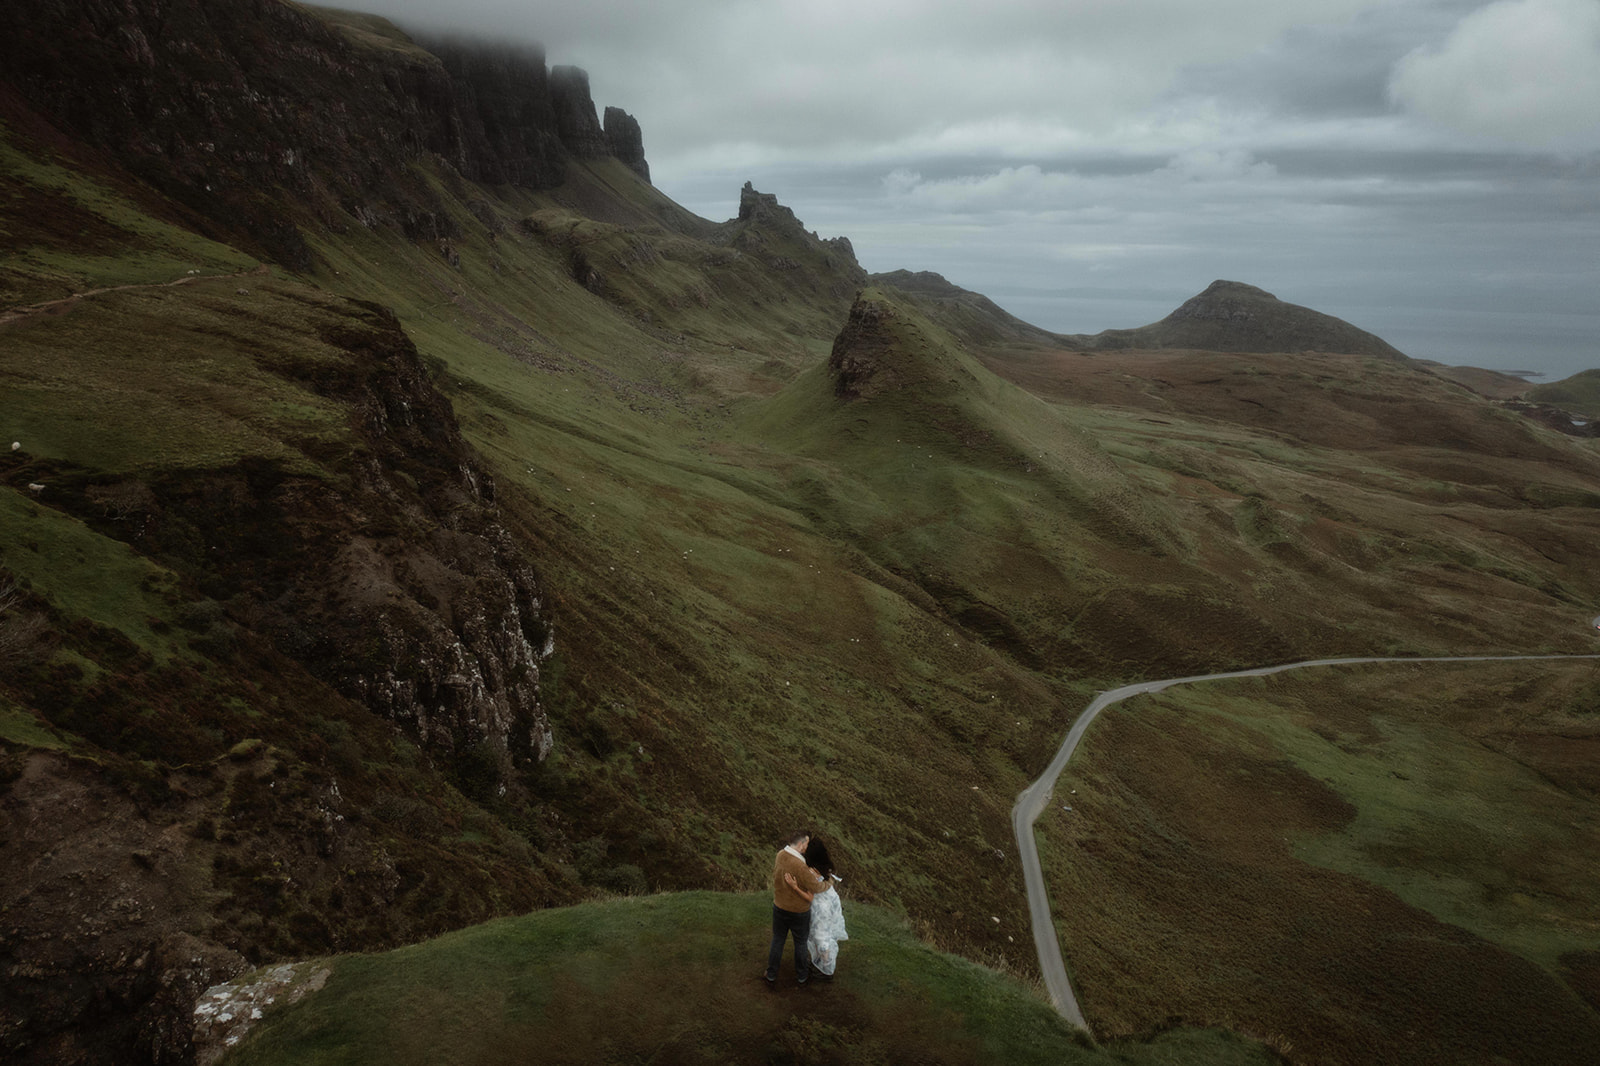 Alex and Elliot shared a romantic moment while having the majestic Quiraing, Isle of Skye, Scotland as their backdrop